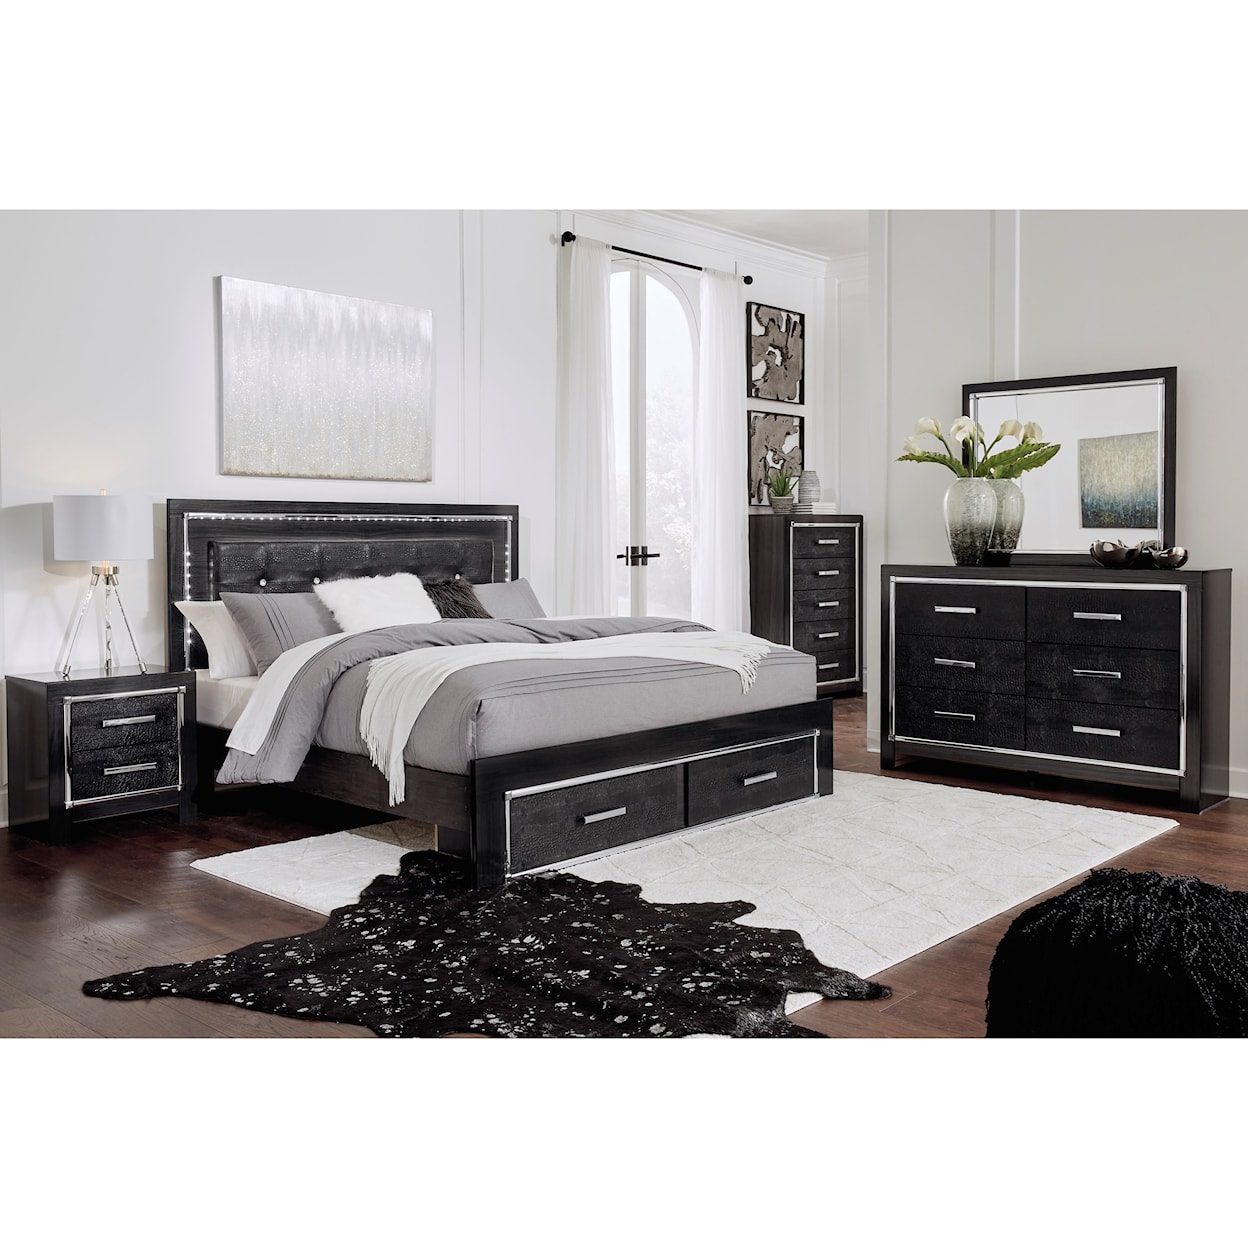 Signature Design Kaydell King Uph Storage Bed with LED Lighting